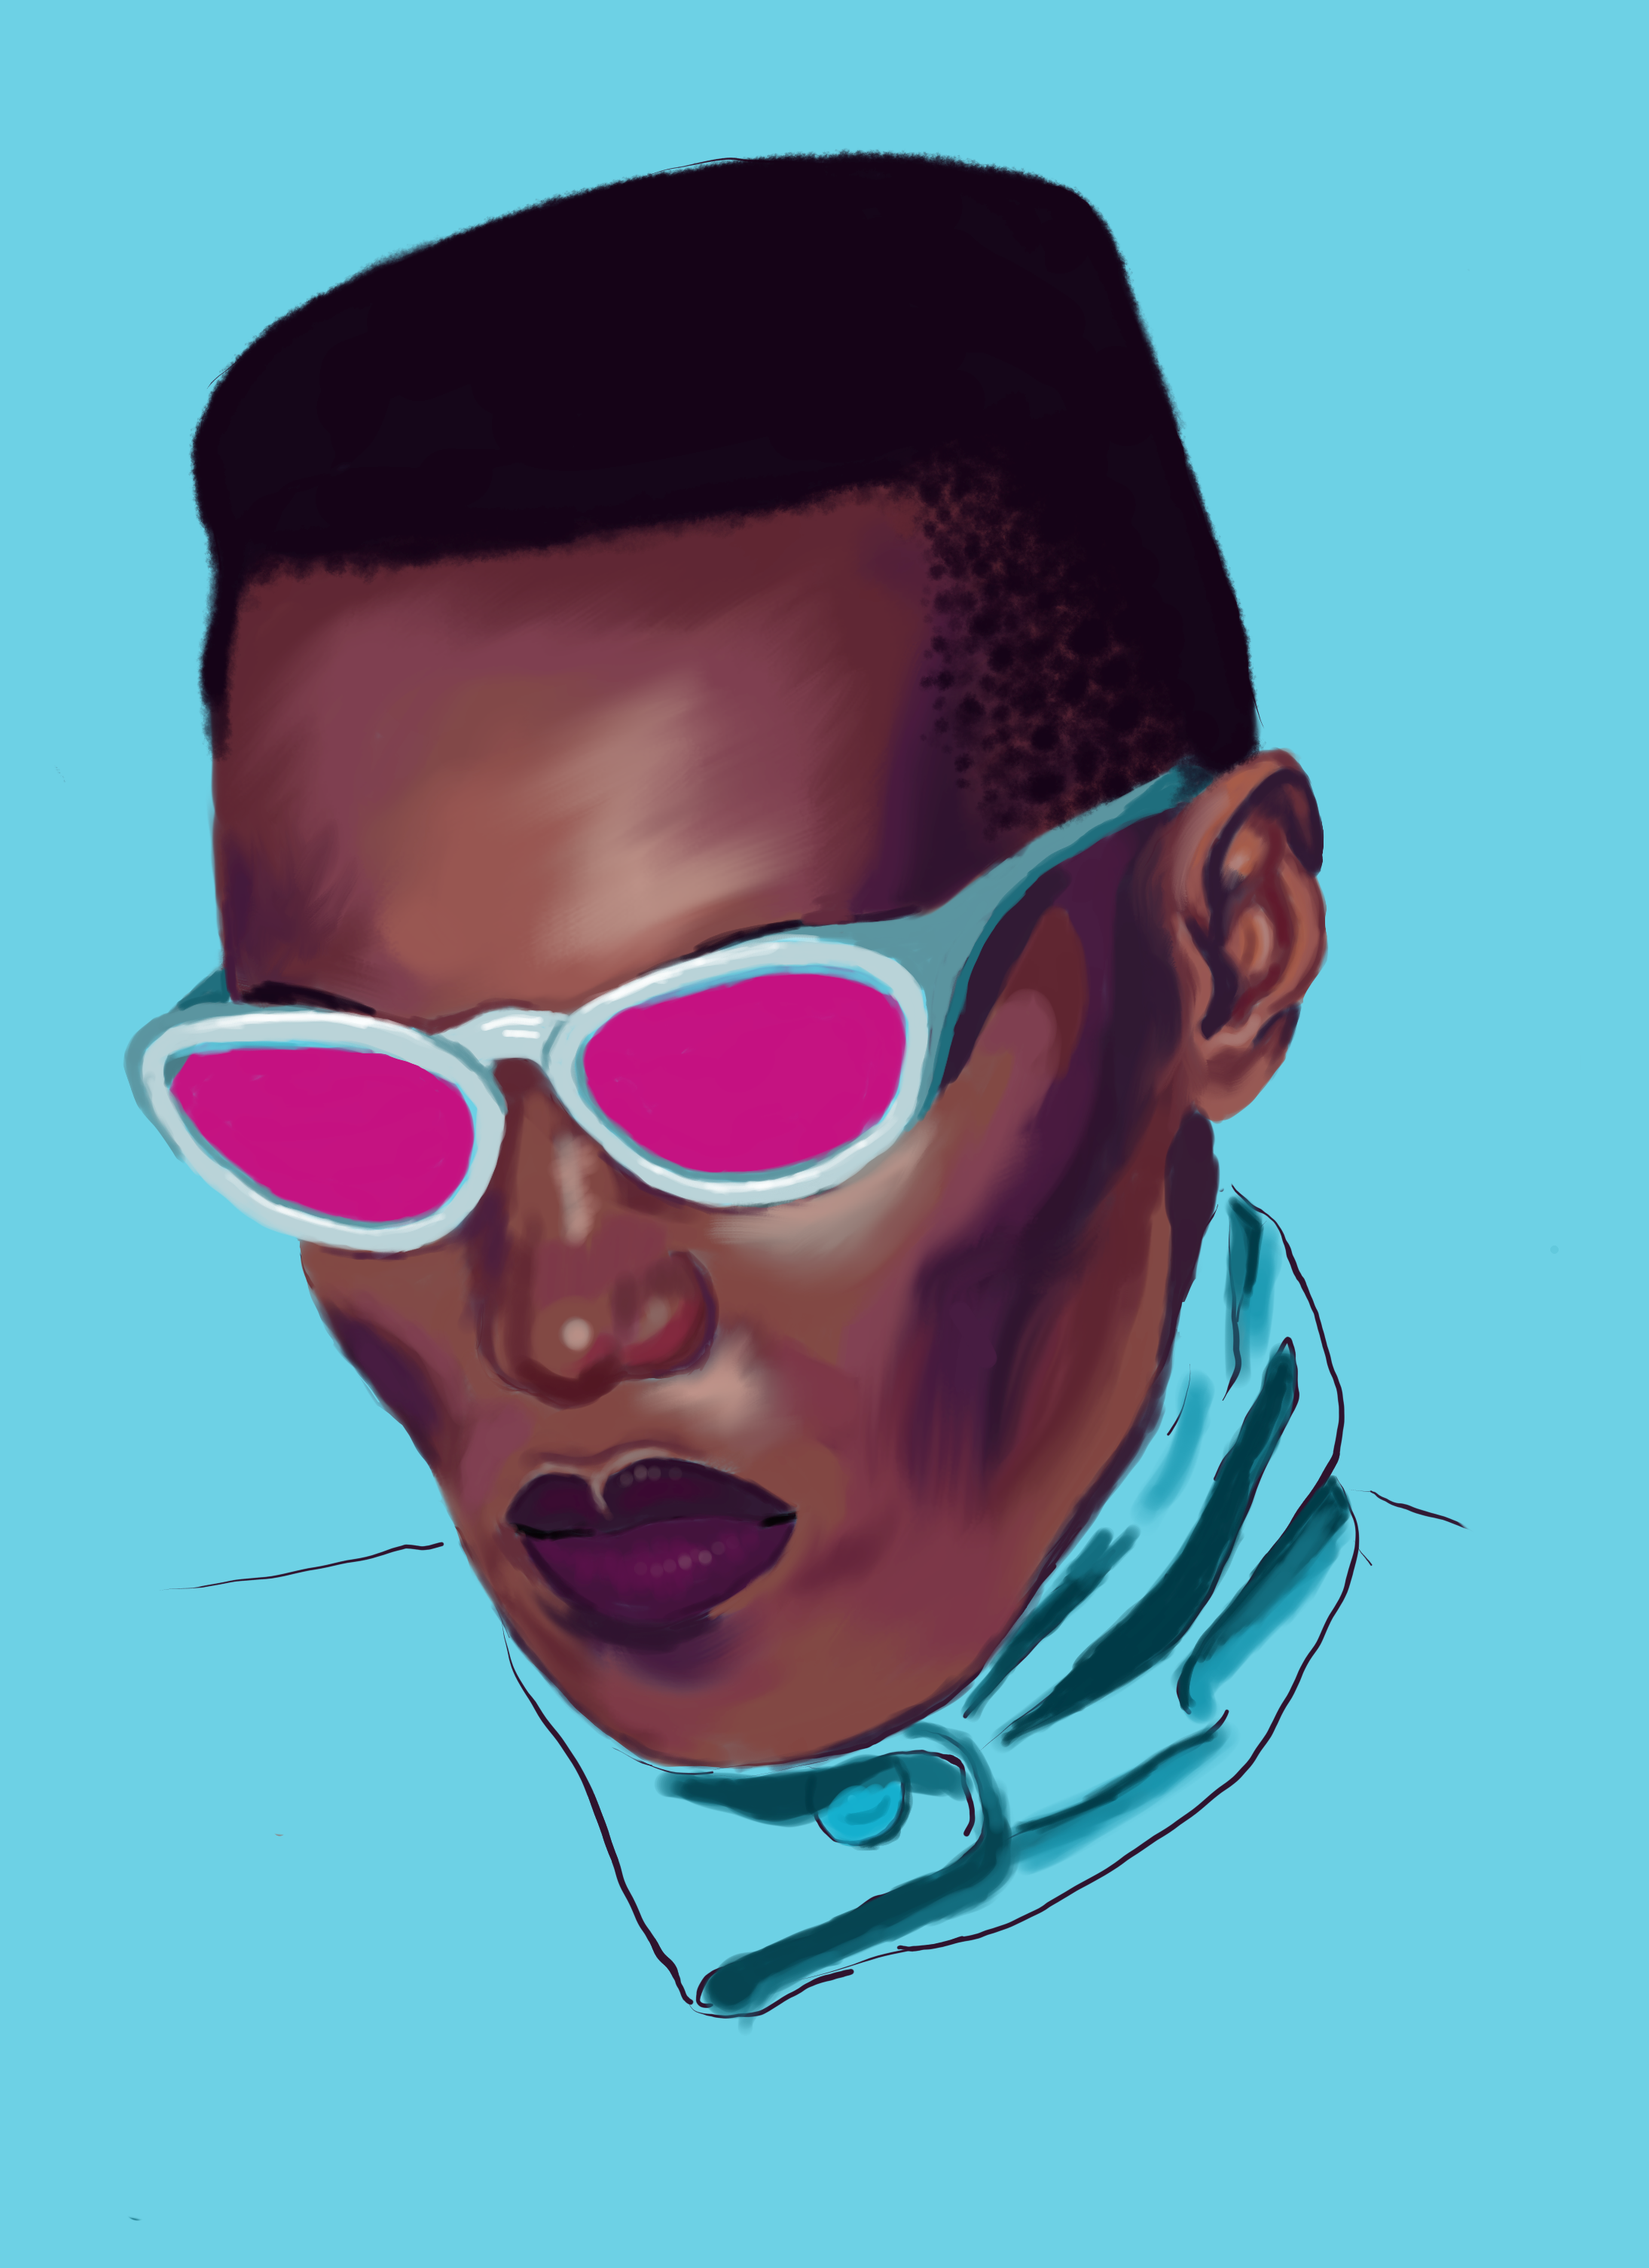 A digital portrait of Grace Jones in a pop art style with bright pinks and blue.